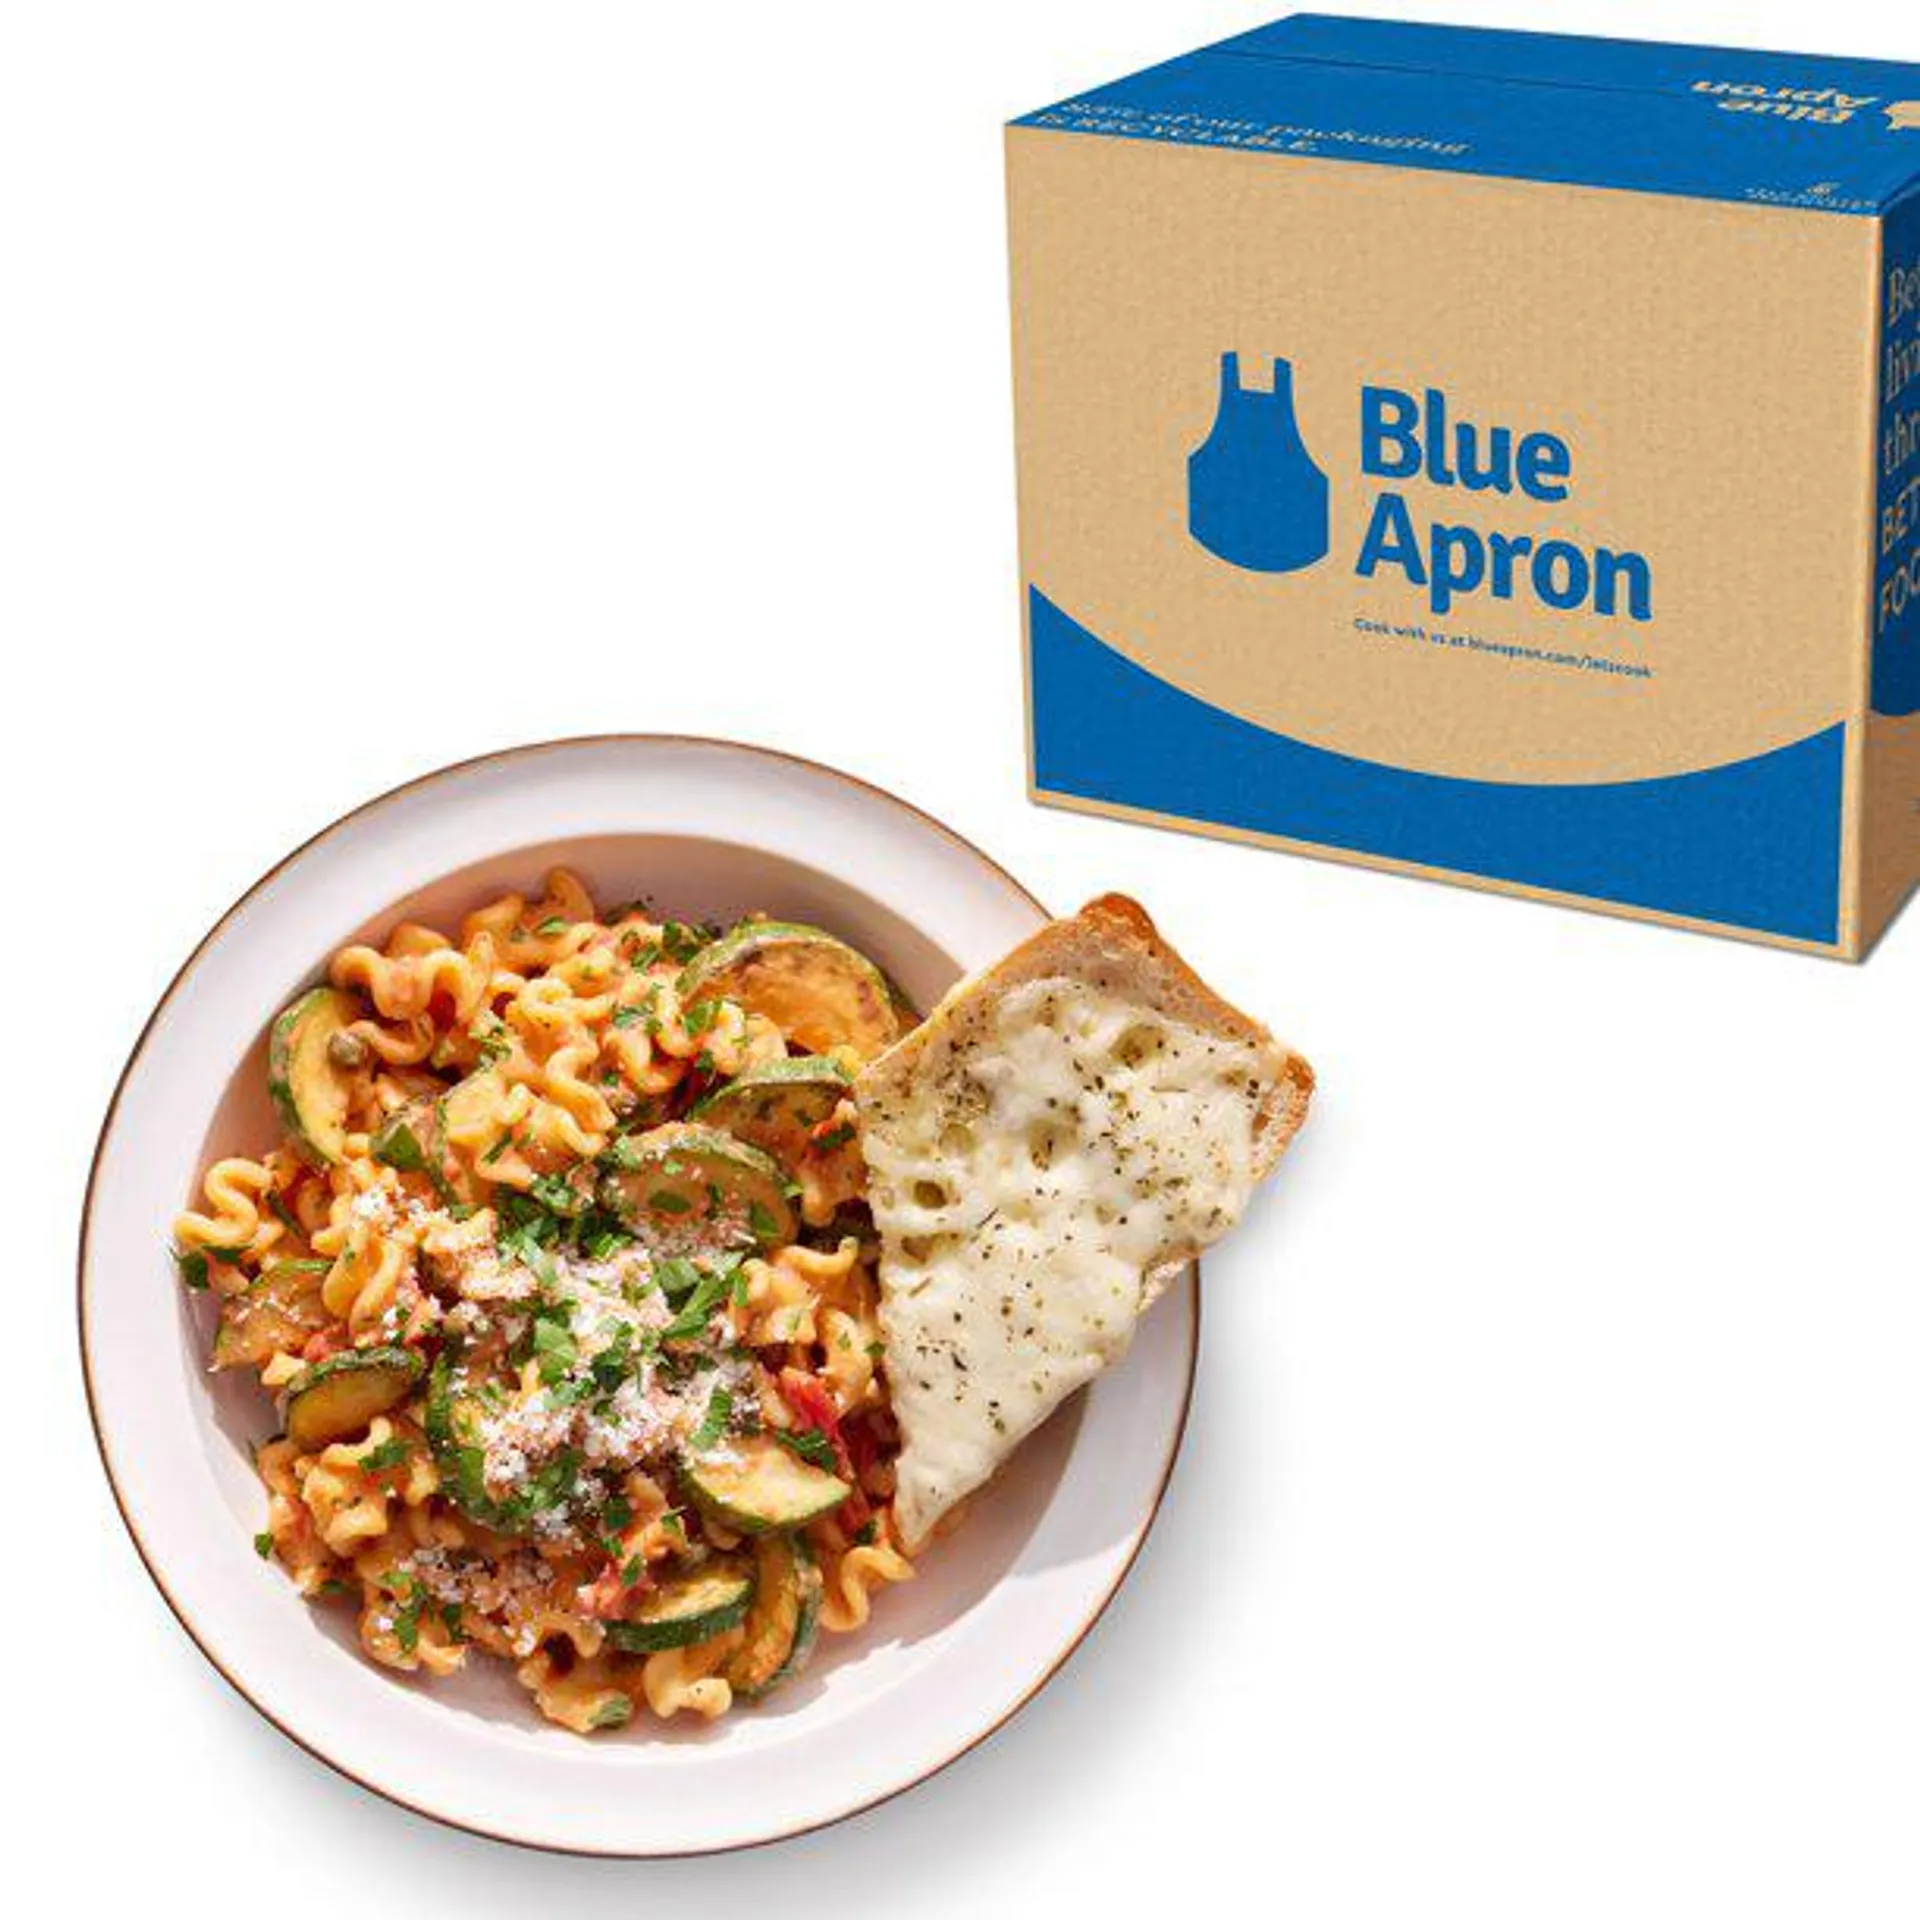 Blue Apron Malfada Pasta in Creamy Tomato Sauce Family Meal Kit, 4 Servings Each